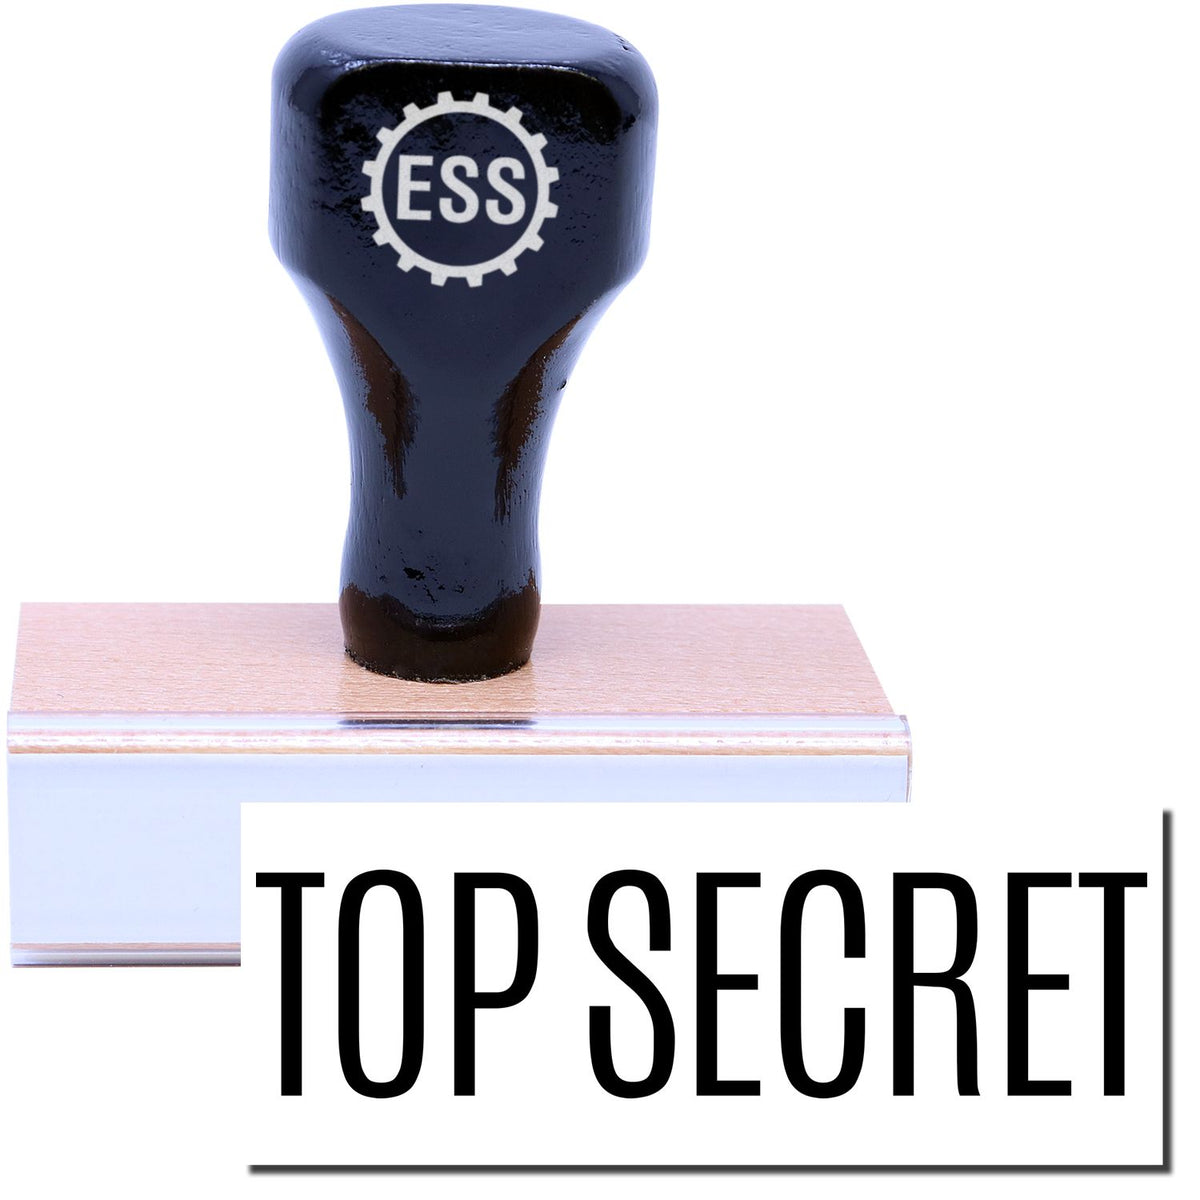 A stock office rubber stamp with a stamped image showing how the text &quot;TOP SECRET&quot; is displayed after stamping.